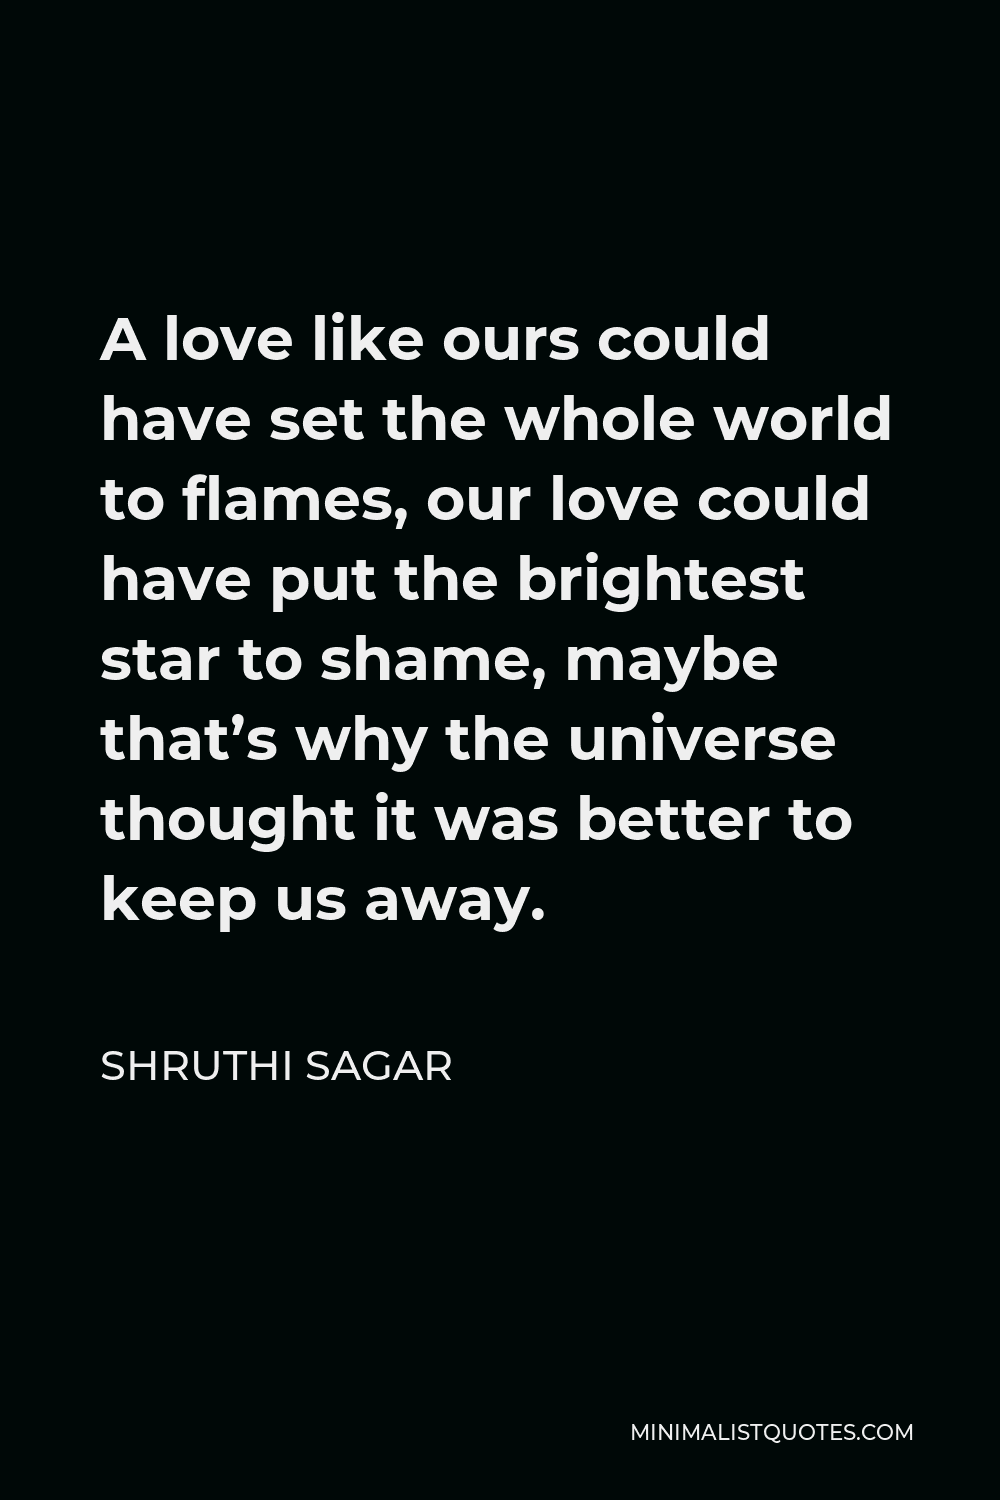 Shruthi Sagar Quote - A love like ours could have set the whole world to flames, our love could have put the brightest star to shame, maybe that’s why the universe thought it was better to keep us away.